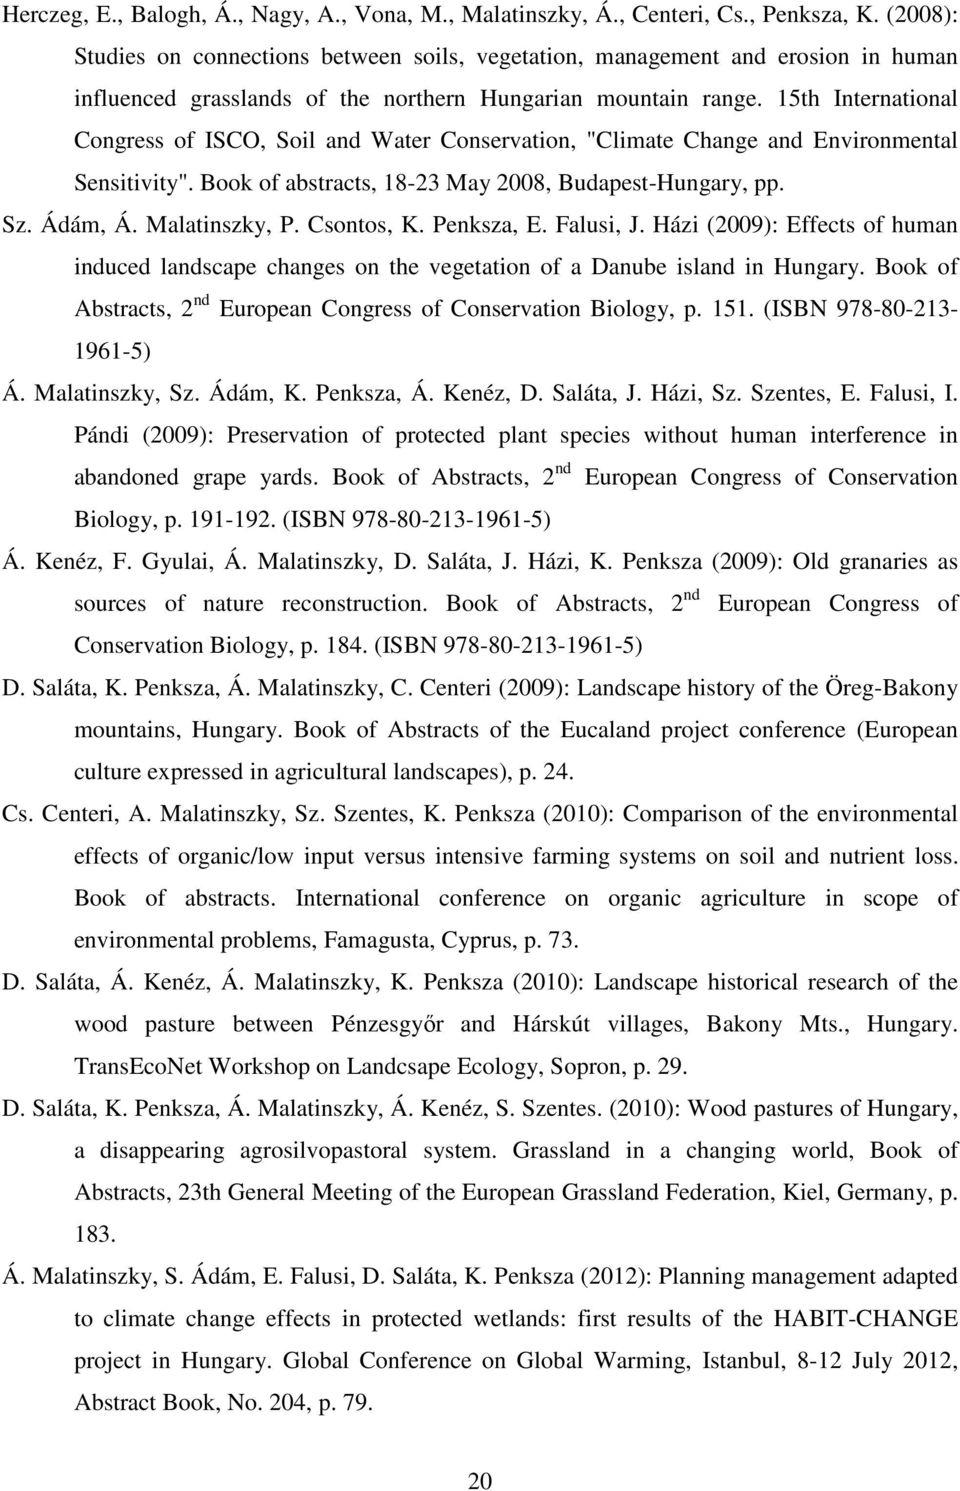 15th International Congress of ISCO, Soil and Water Conservation, "Climate Change and Environmental Sensitivity". Book of abstracts, 18-23 May 2008, Budapest-Hungary, pp. Sz. Ádám, Á. Malatinszky, P.